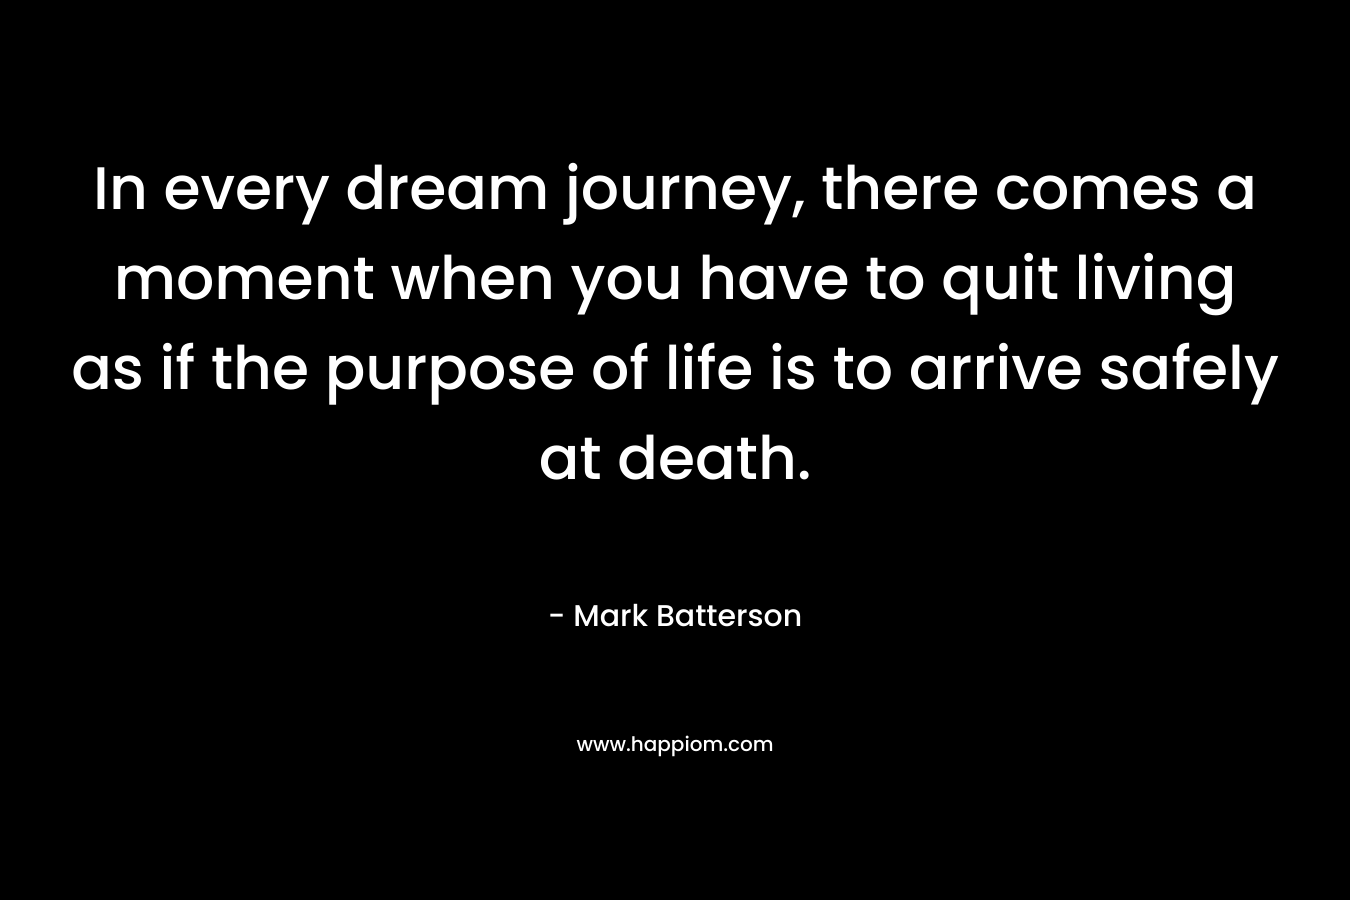 In every dream journey, there comes a moment when you have to quit living as if the purpose of life is to arrive safely at death.